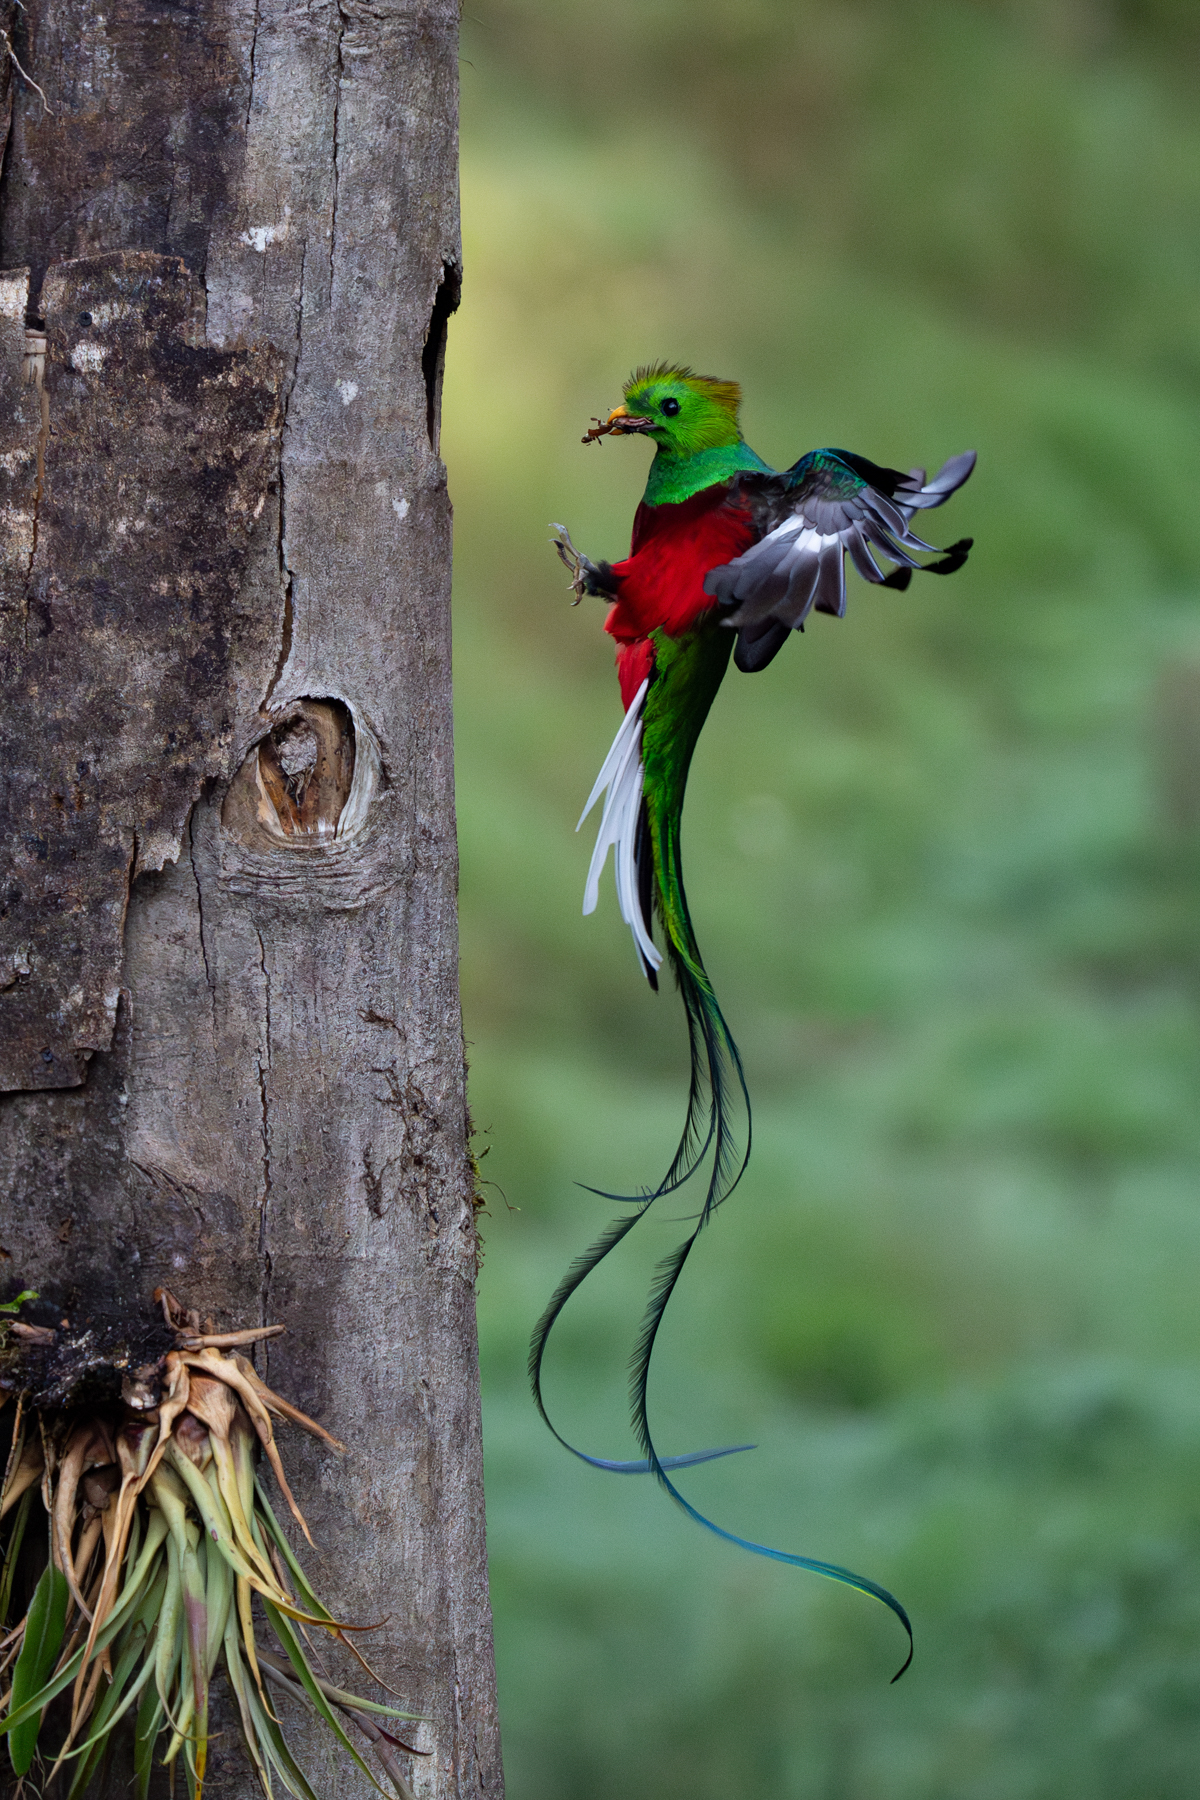 A male Resplendent Quetzal delivering an insect meal to its chick on the nest (image by Inger Vandyke)